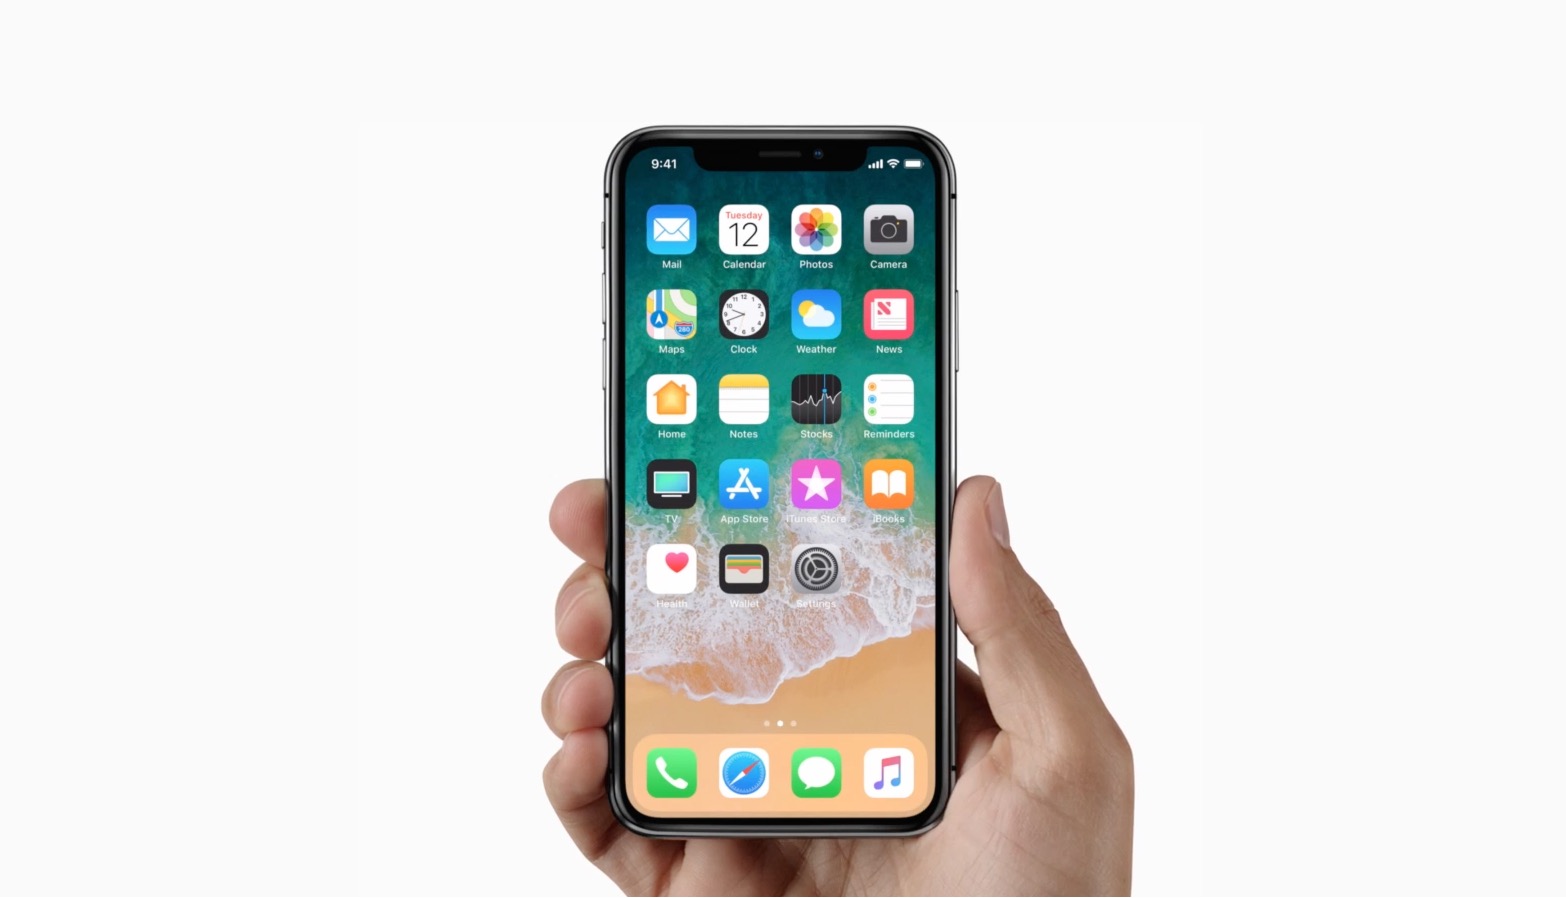 Apple iPhone X hands on